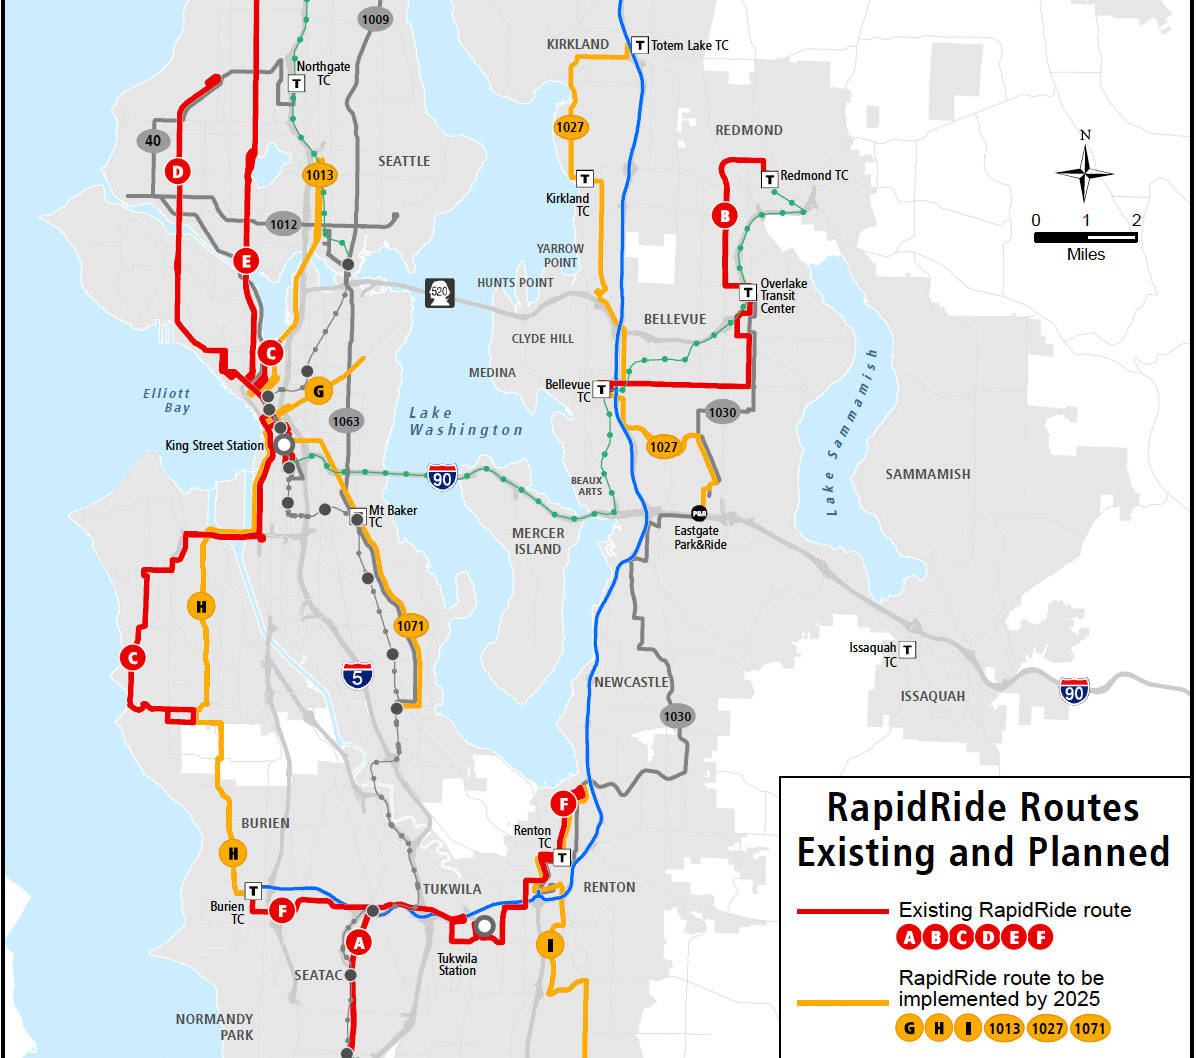 After previously aiming to build 20 RapidRide lines throughout the region by 2040, King County Metro is now only promising seven by 2027. Image courtesy King County